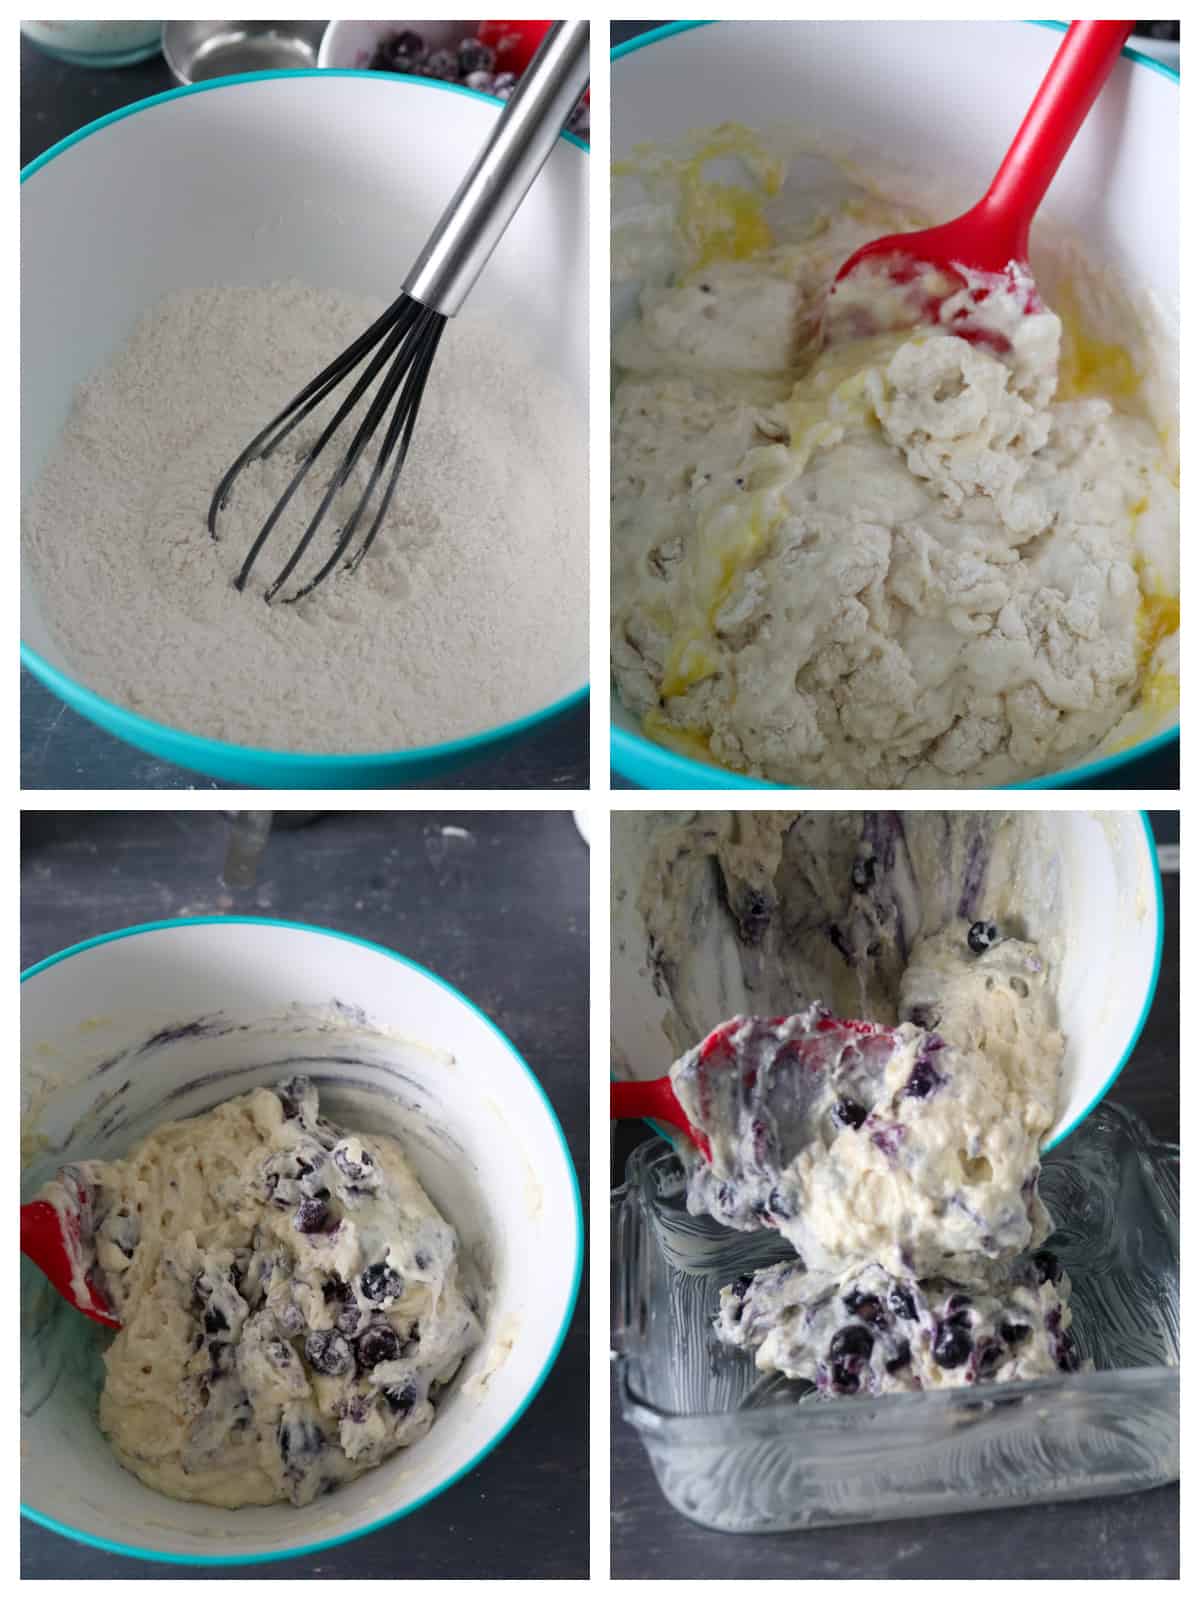 A collage showing the process of making the Blueberry cake batter.